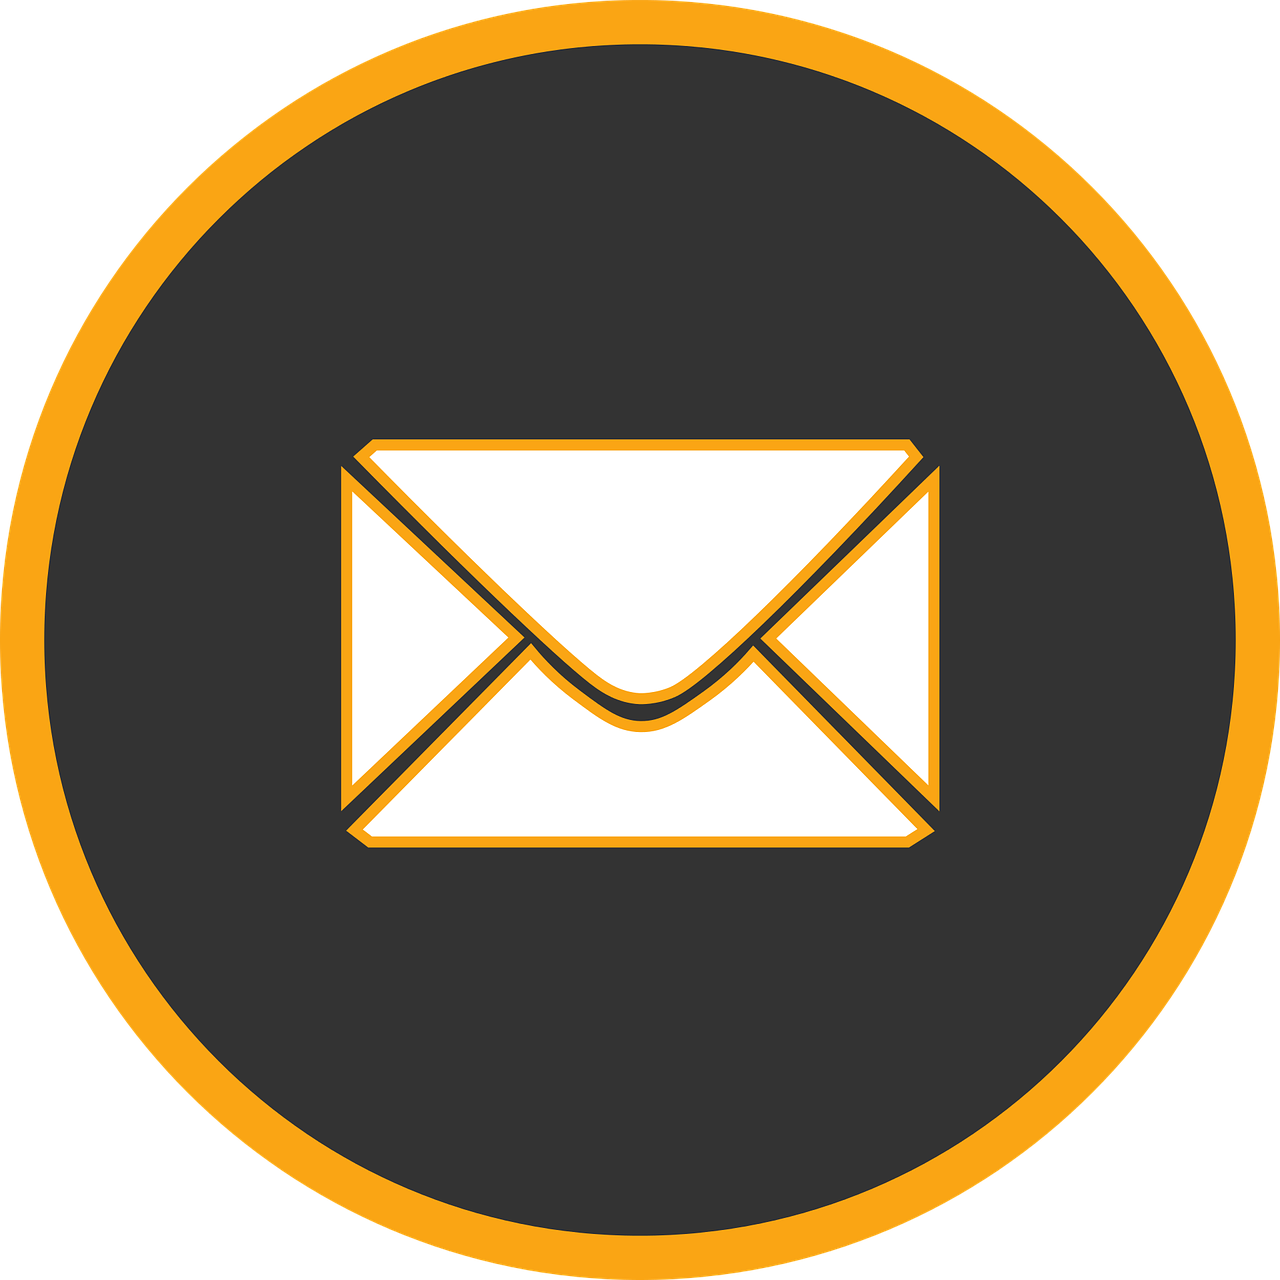 Image of an email envelope